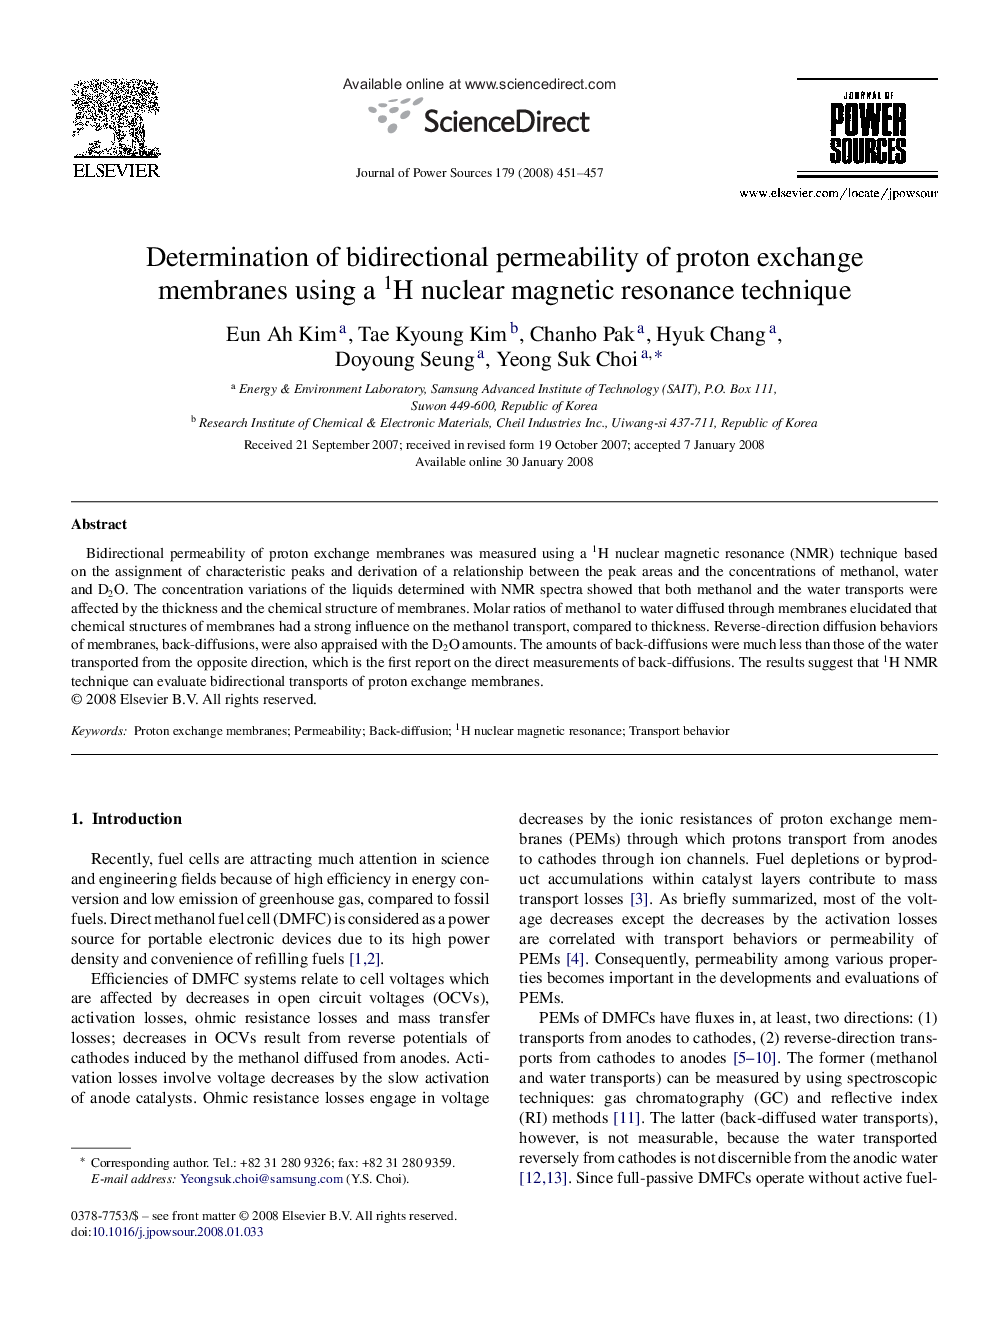 Determination of bidirectional permeability of proton exchange membranes using a 1H nuclear magnetic resonance technique